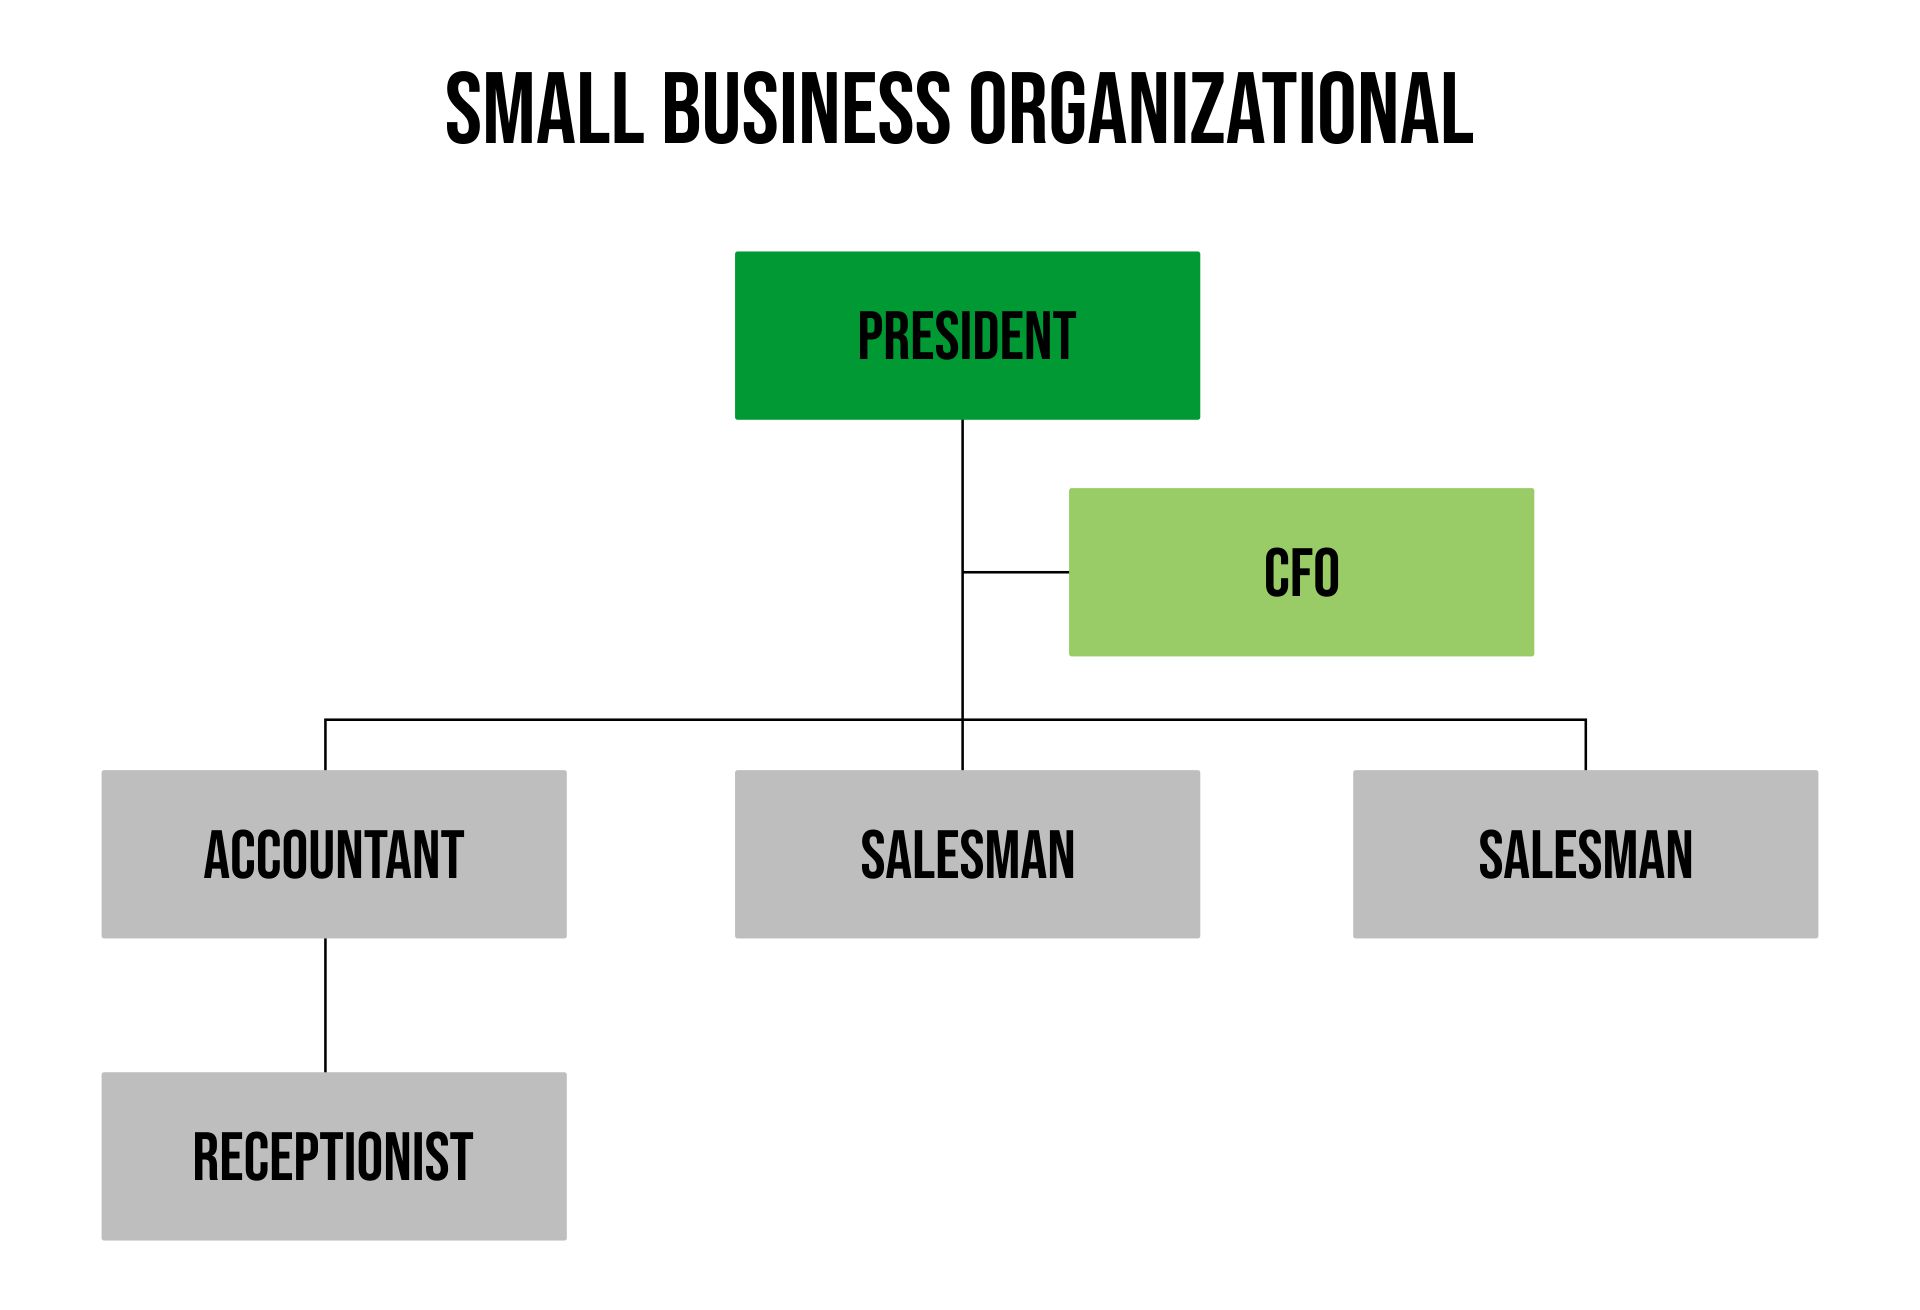 21 Best Organizational Chart Template Free Printable - printablee.com Intended For Small Business Organizational Chart Template